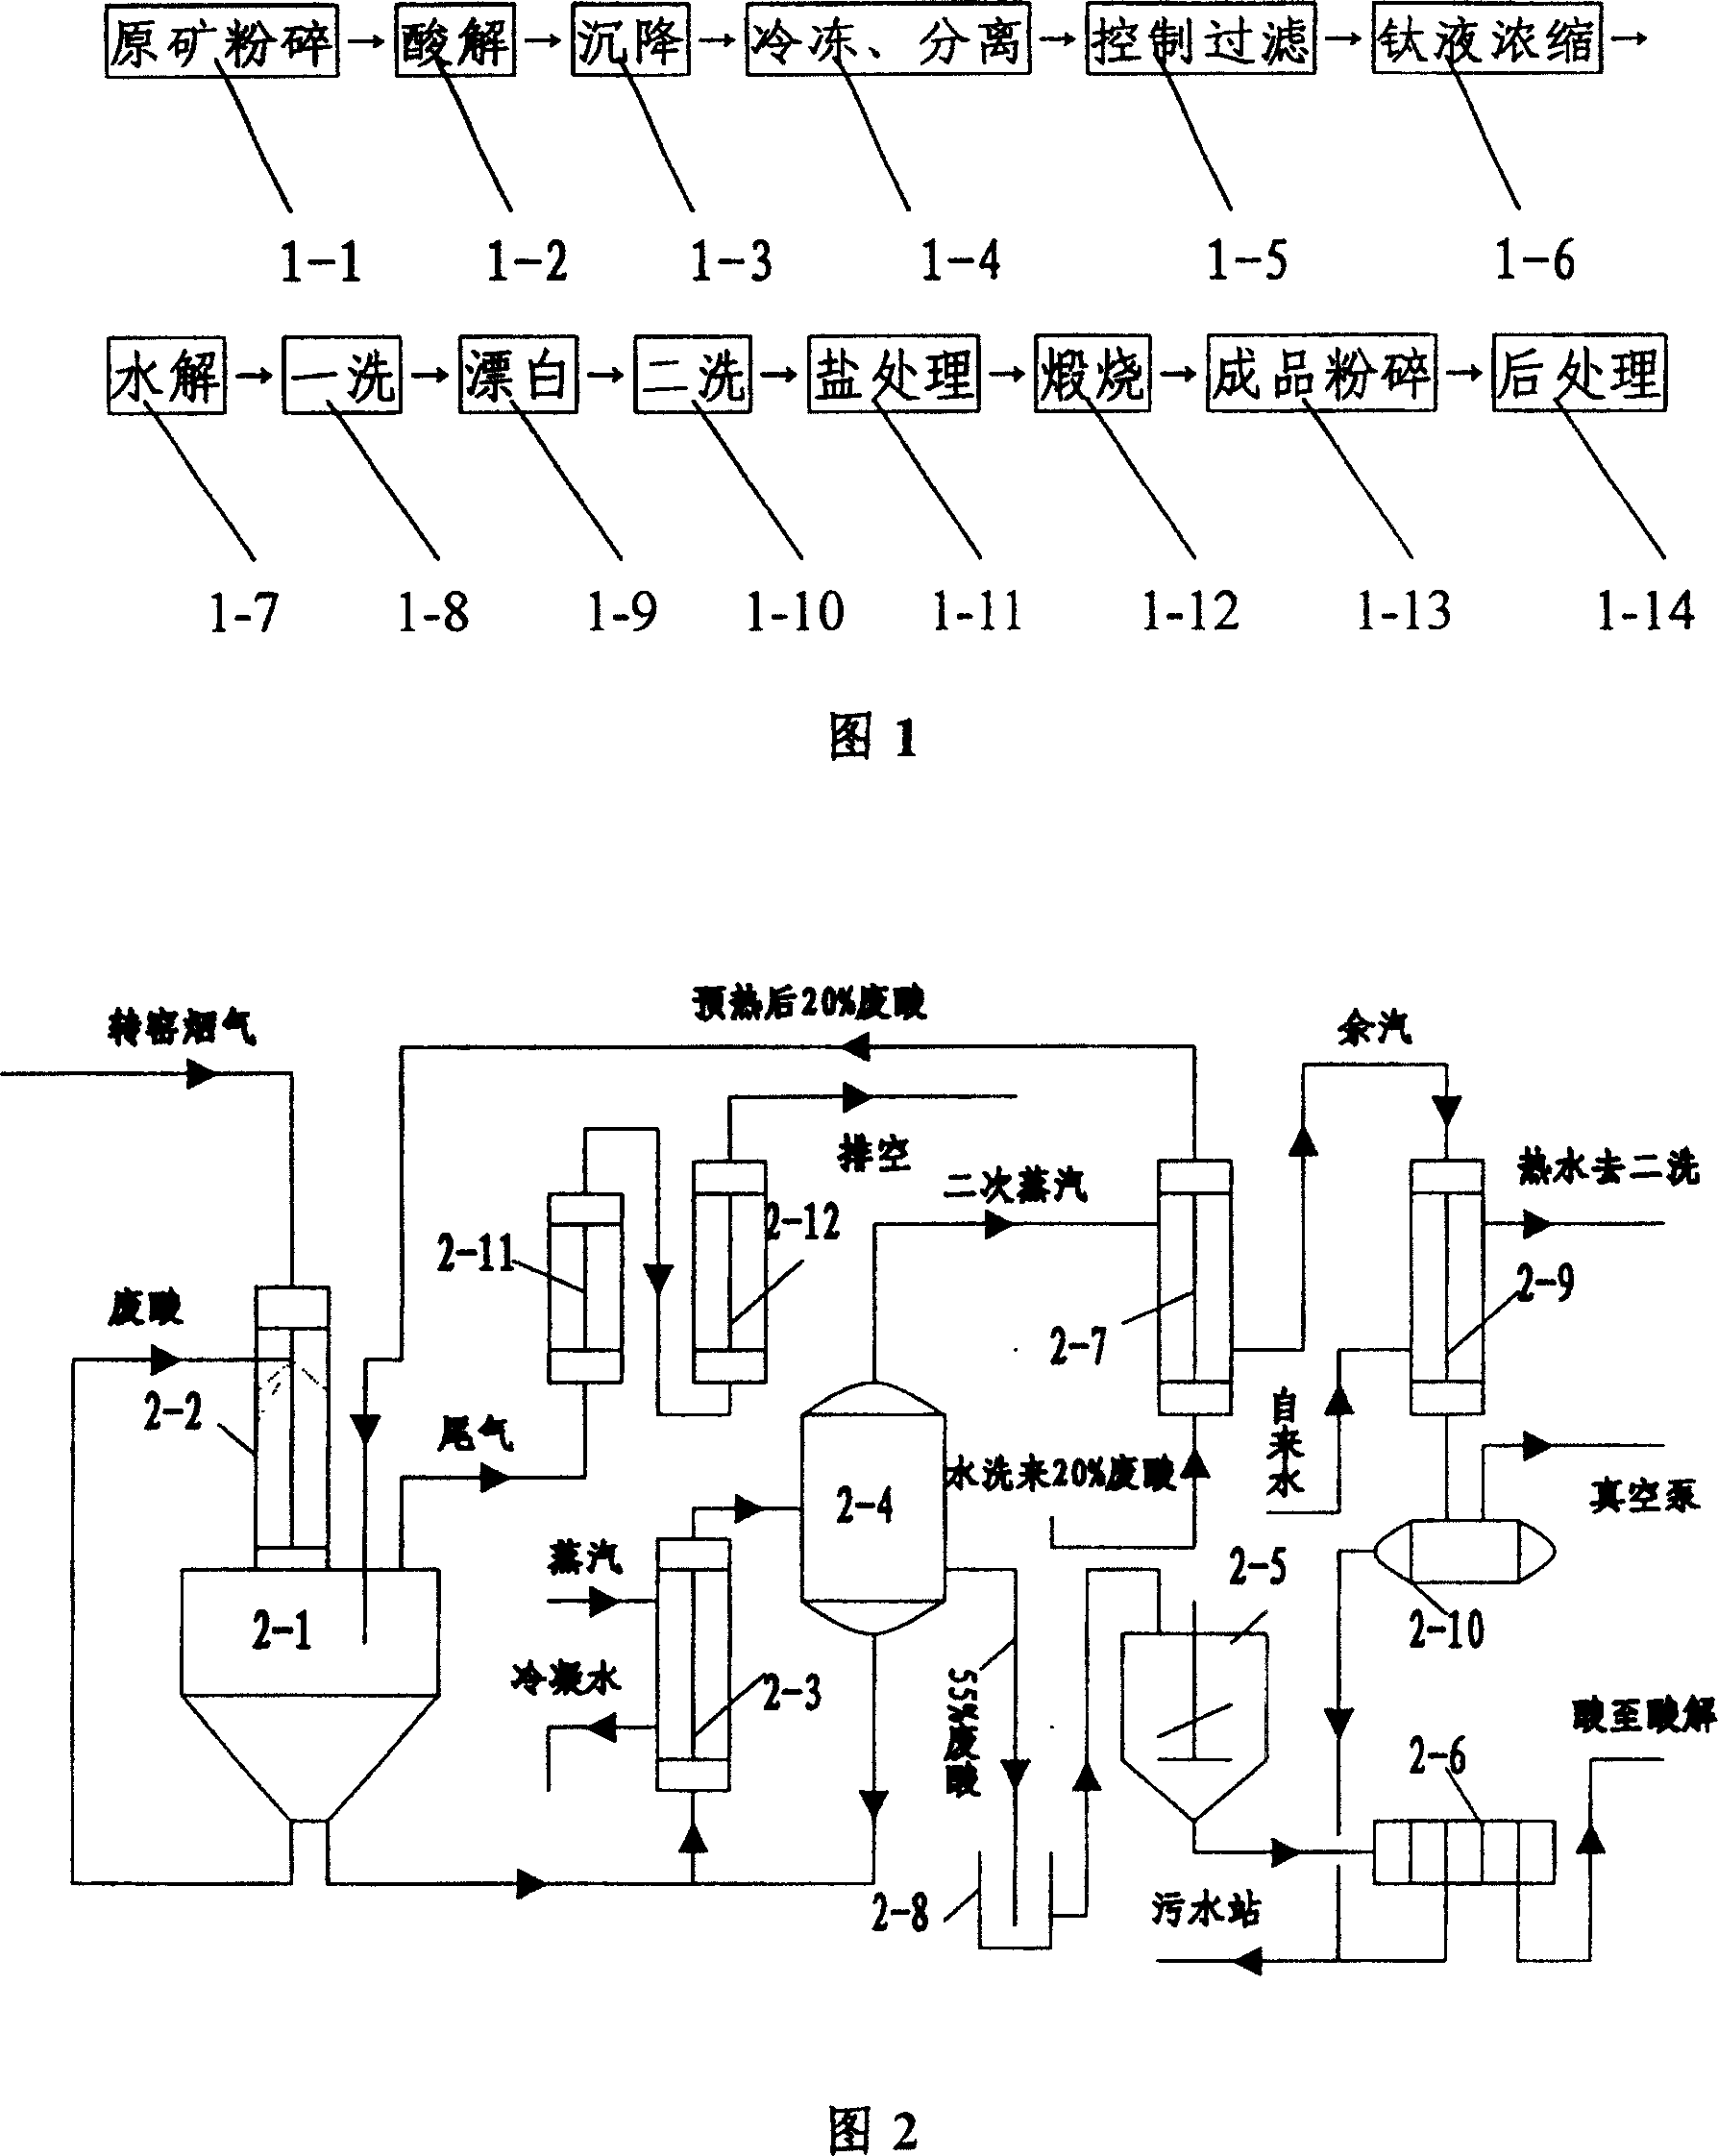 Process of industrialize for waste acid concentrition recovering used in titanium white production by sulfuric acid method